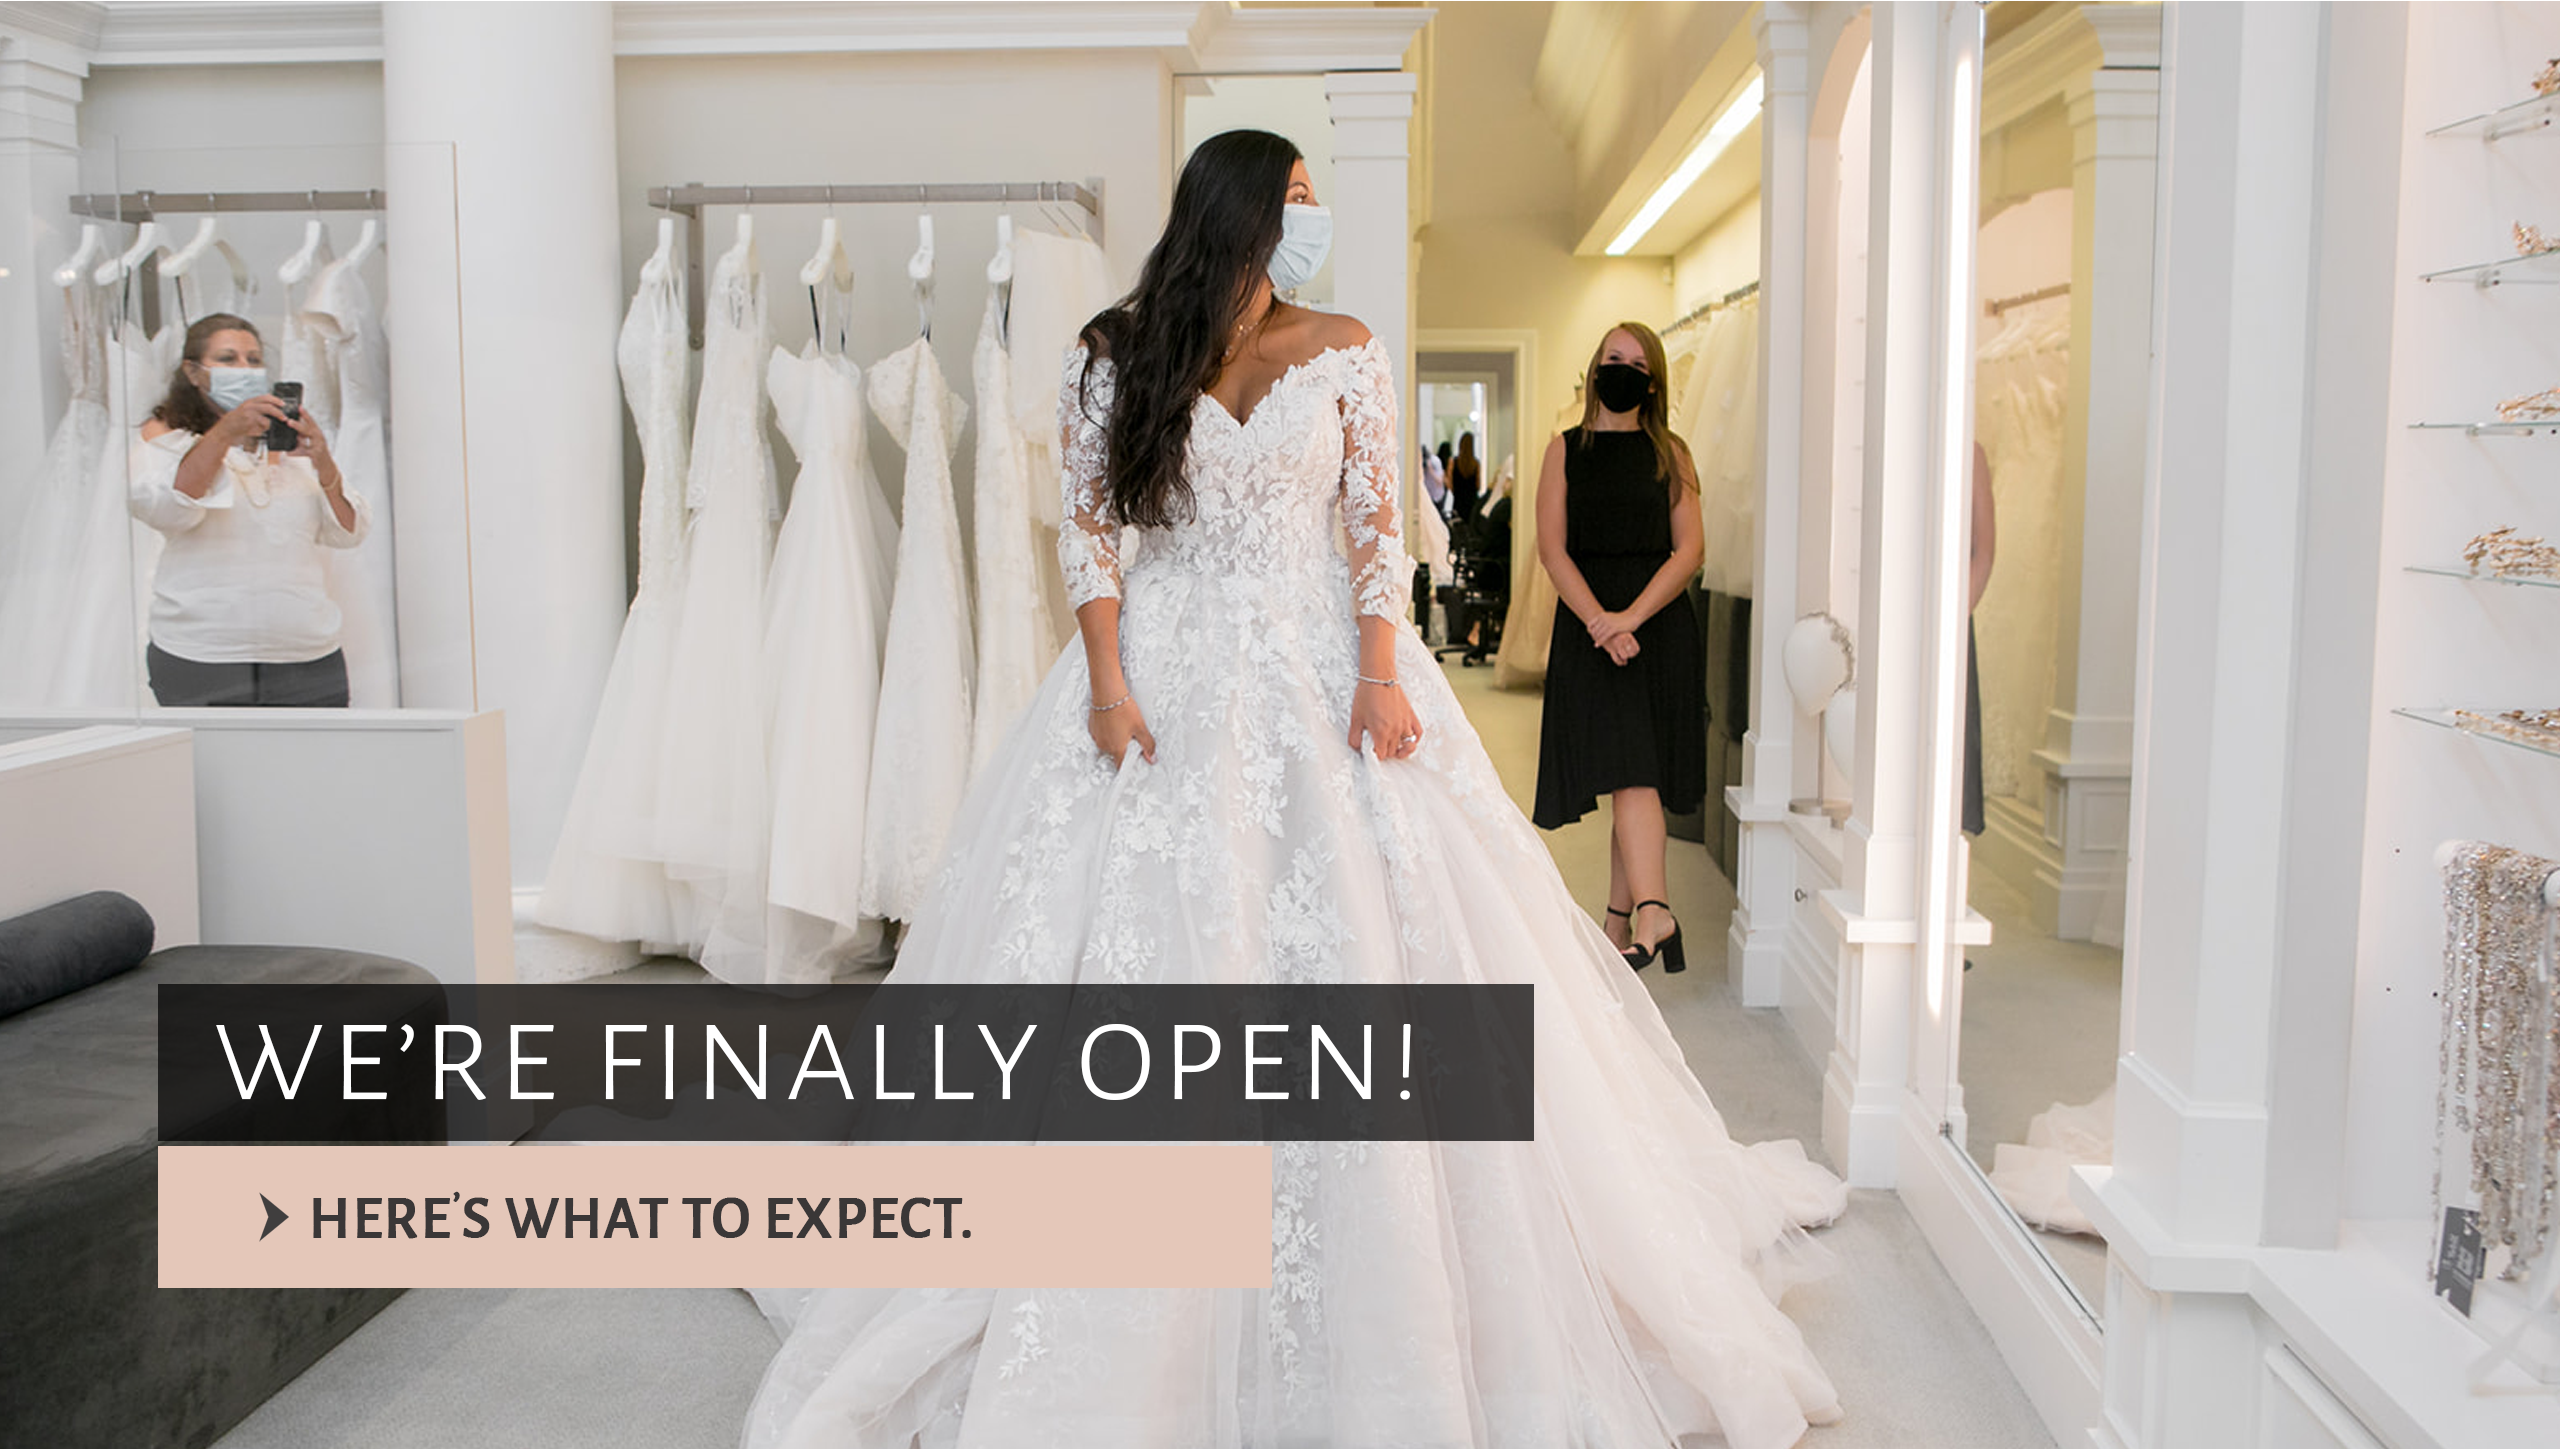 Kleinfeld Bridal The Largest Selection Of Wedding Dresses In The World,Physical Database Design